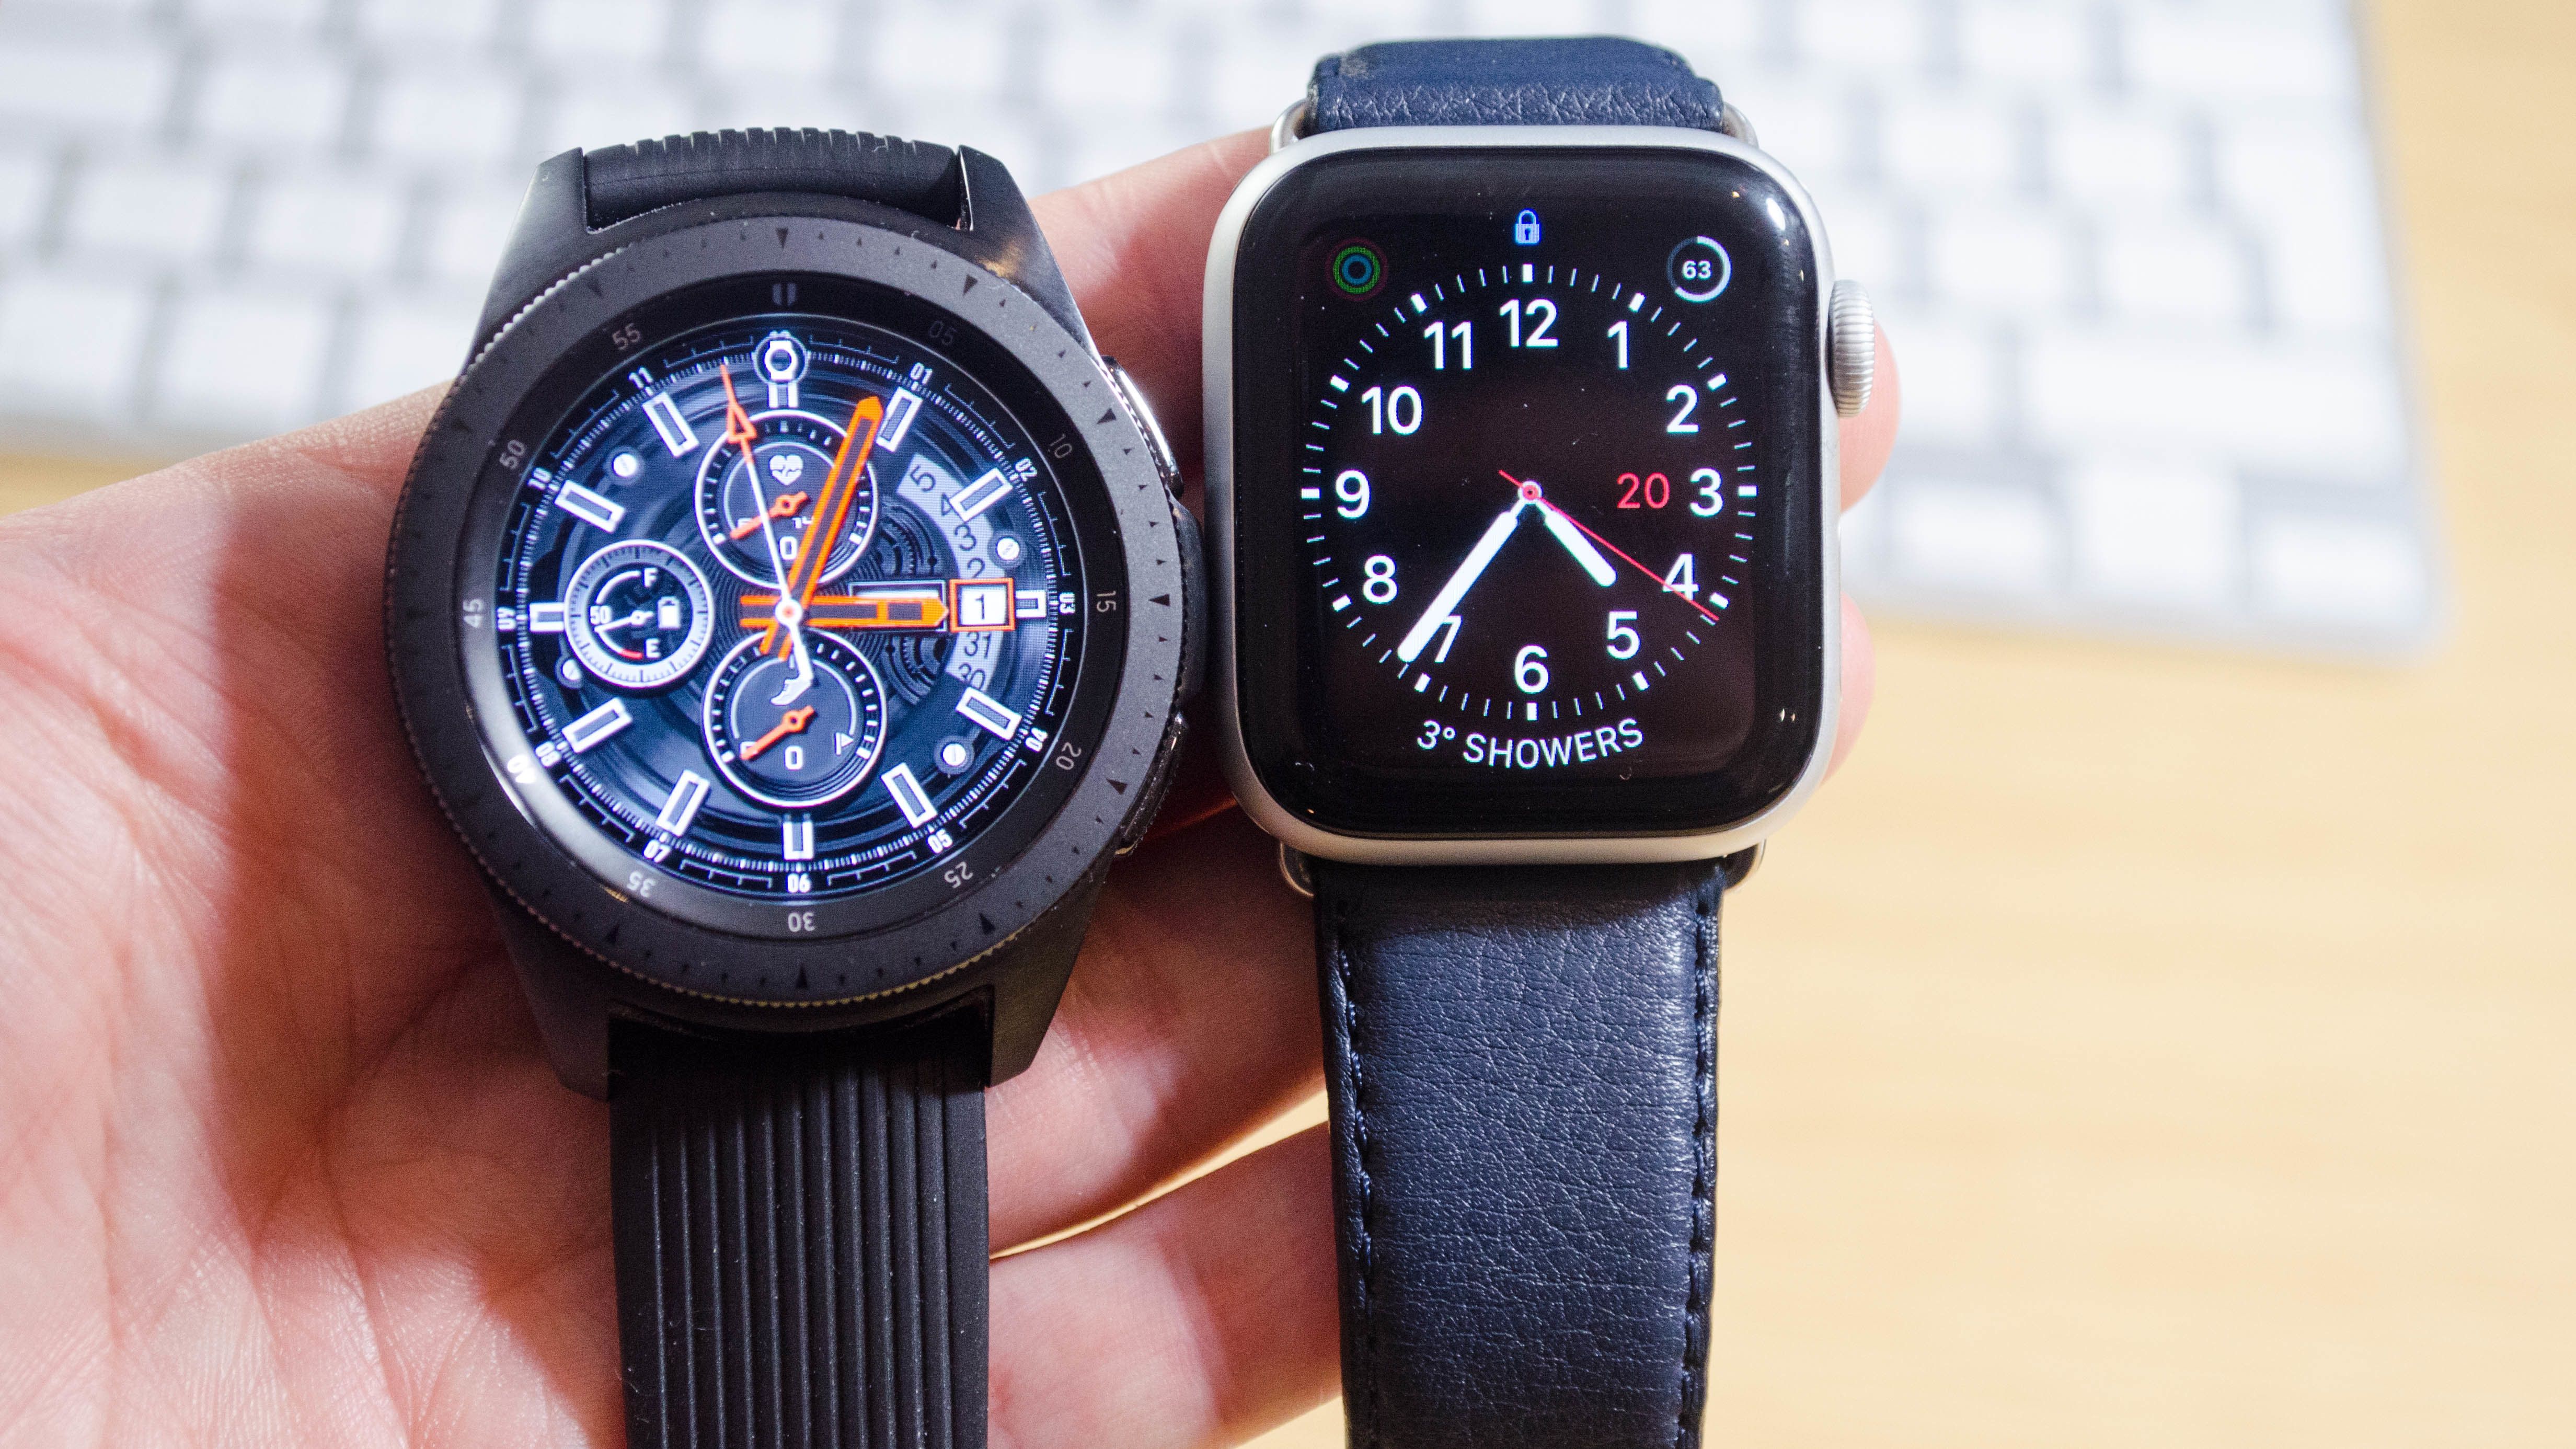 Apple Watch Series 4 vs Samsung Galaxy Watch: Which should you buy?